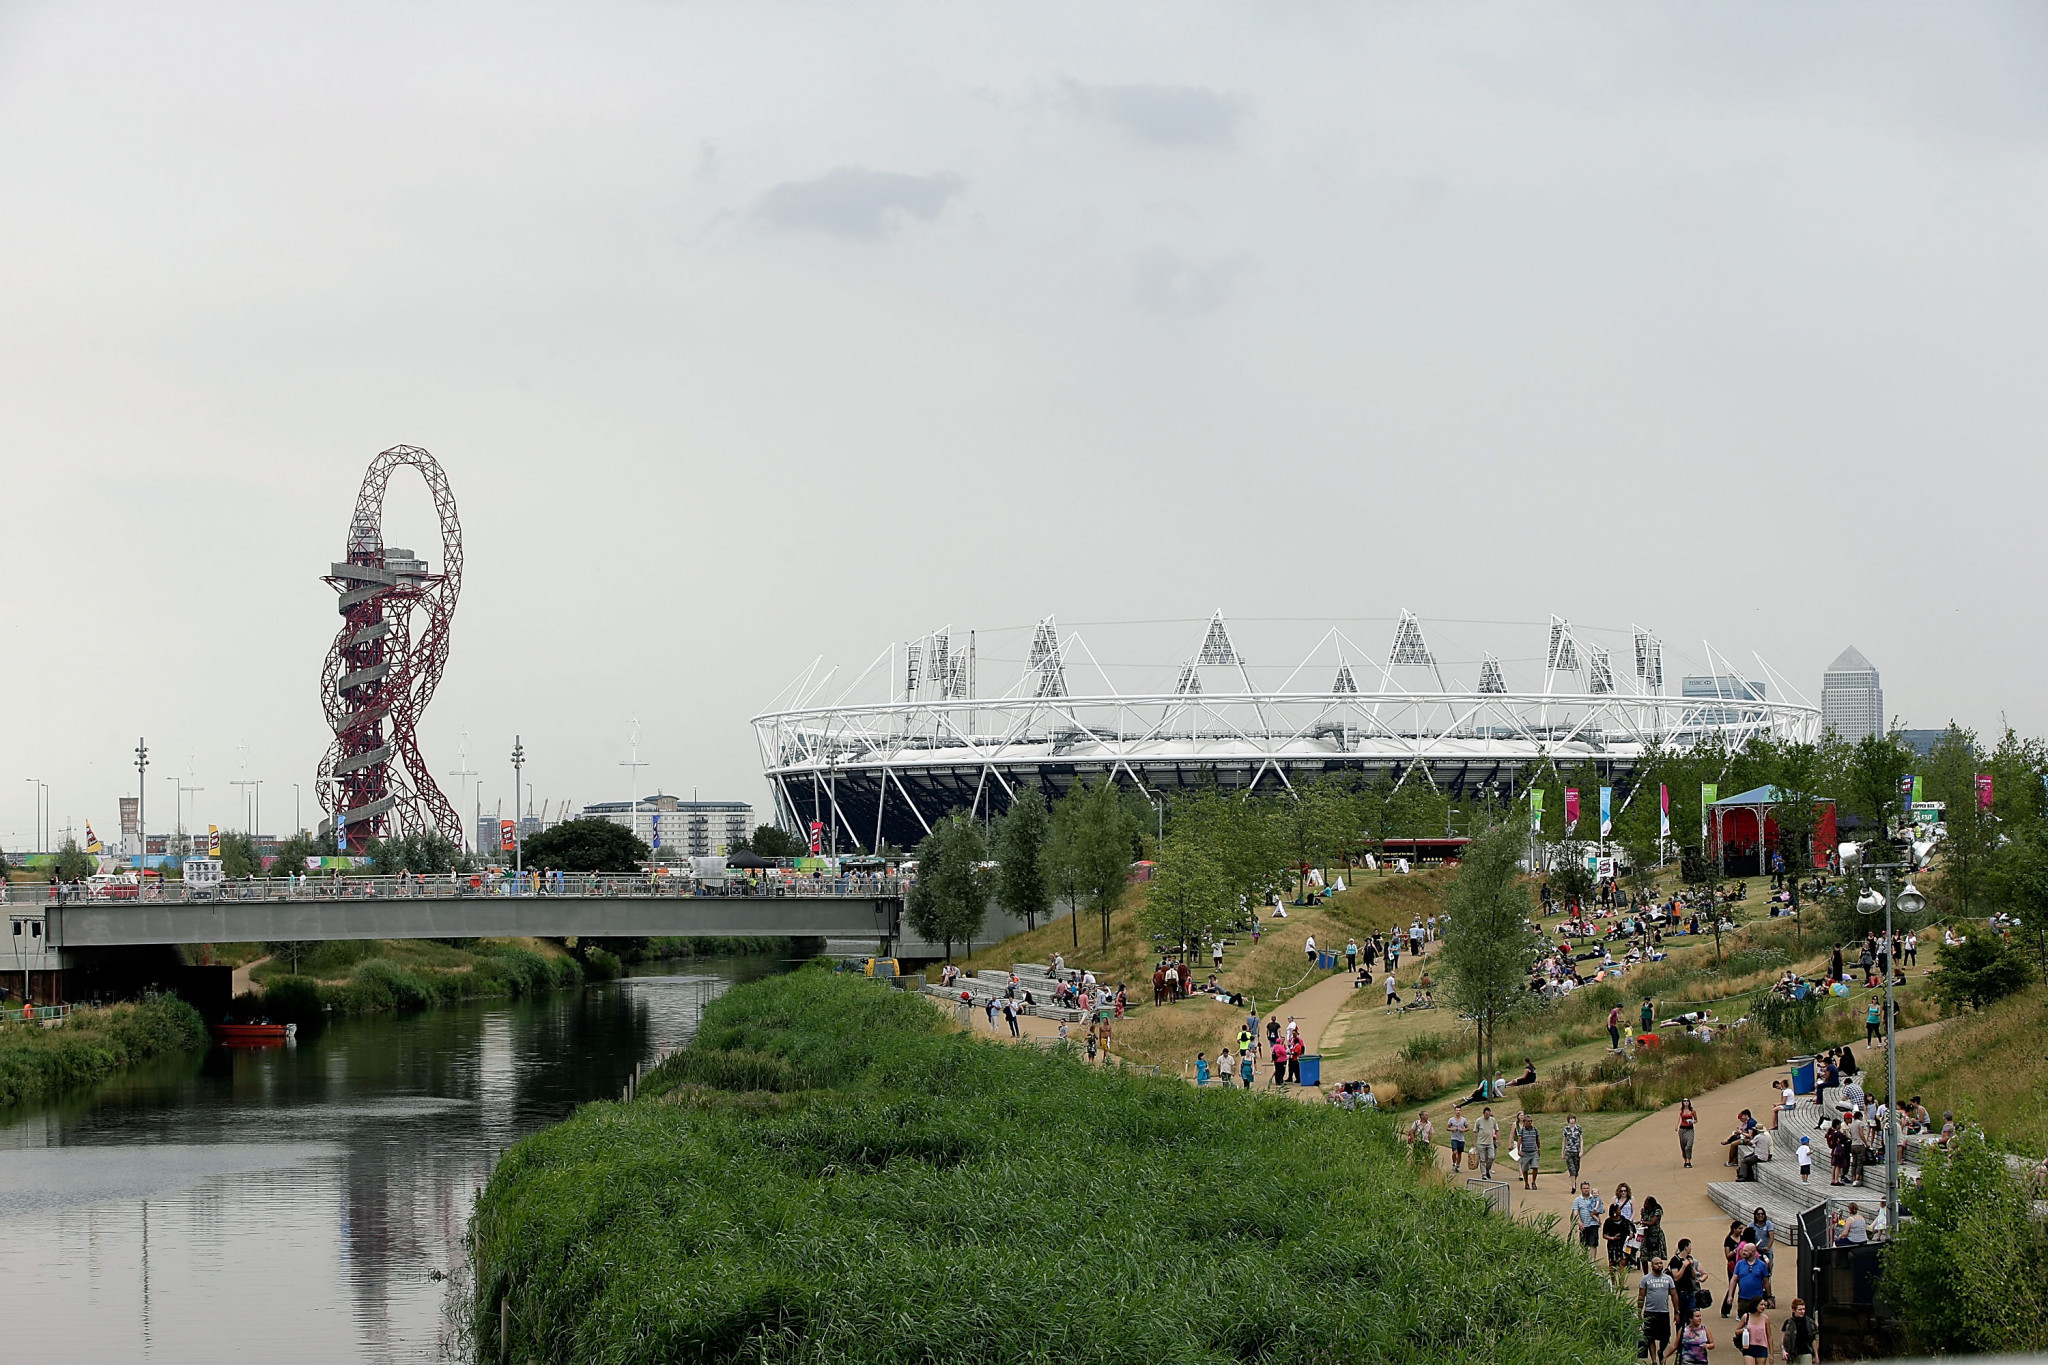 Developers seek new deal for housing project in London 2012 Olympic Park